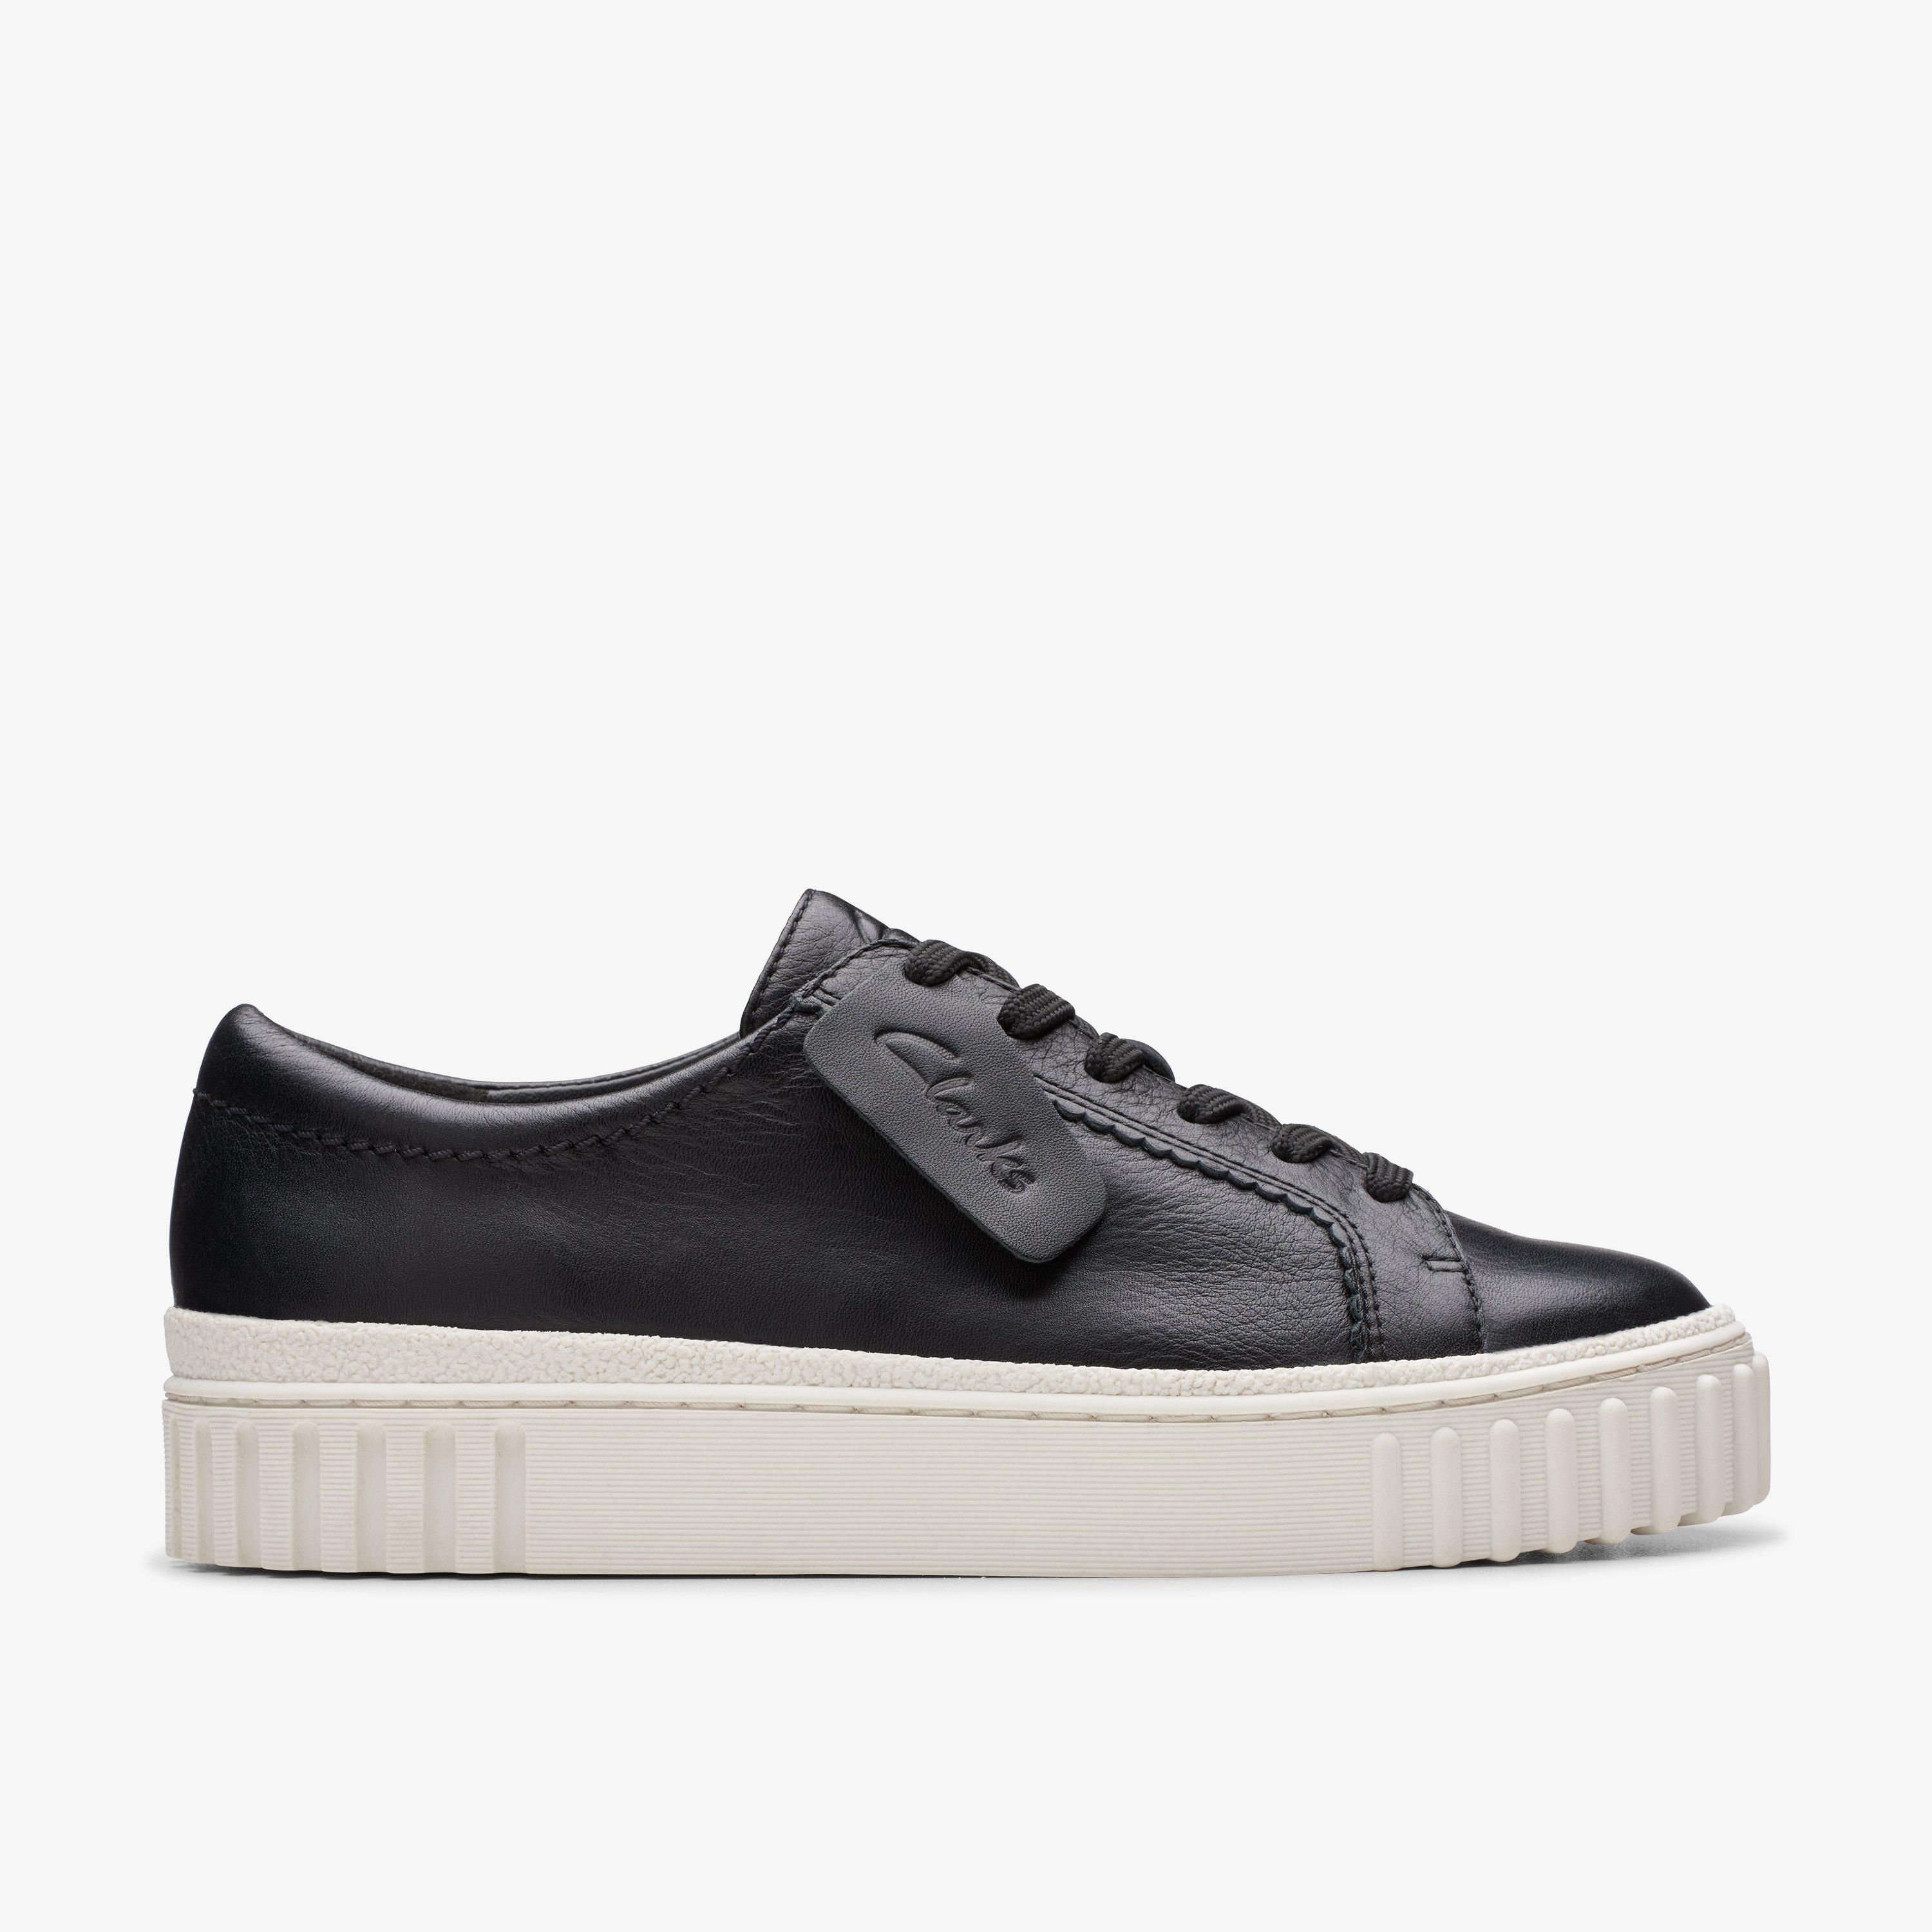 WOMENS Mayhill Walk Black Leather Sneakers | Clarks US | Clarks (US)